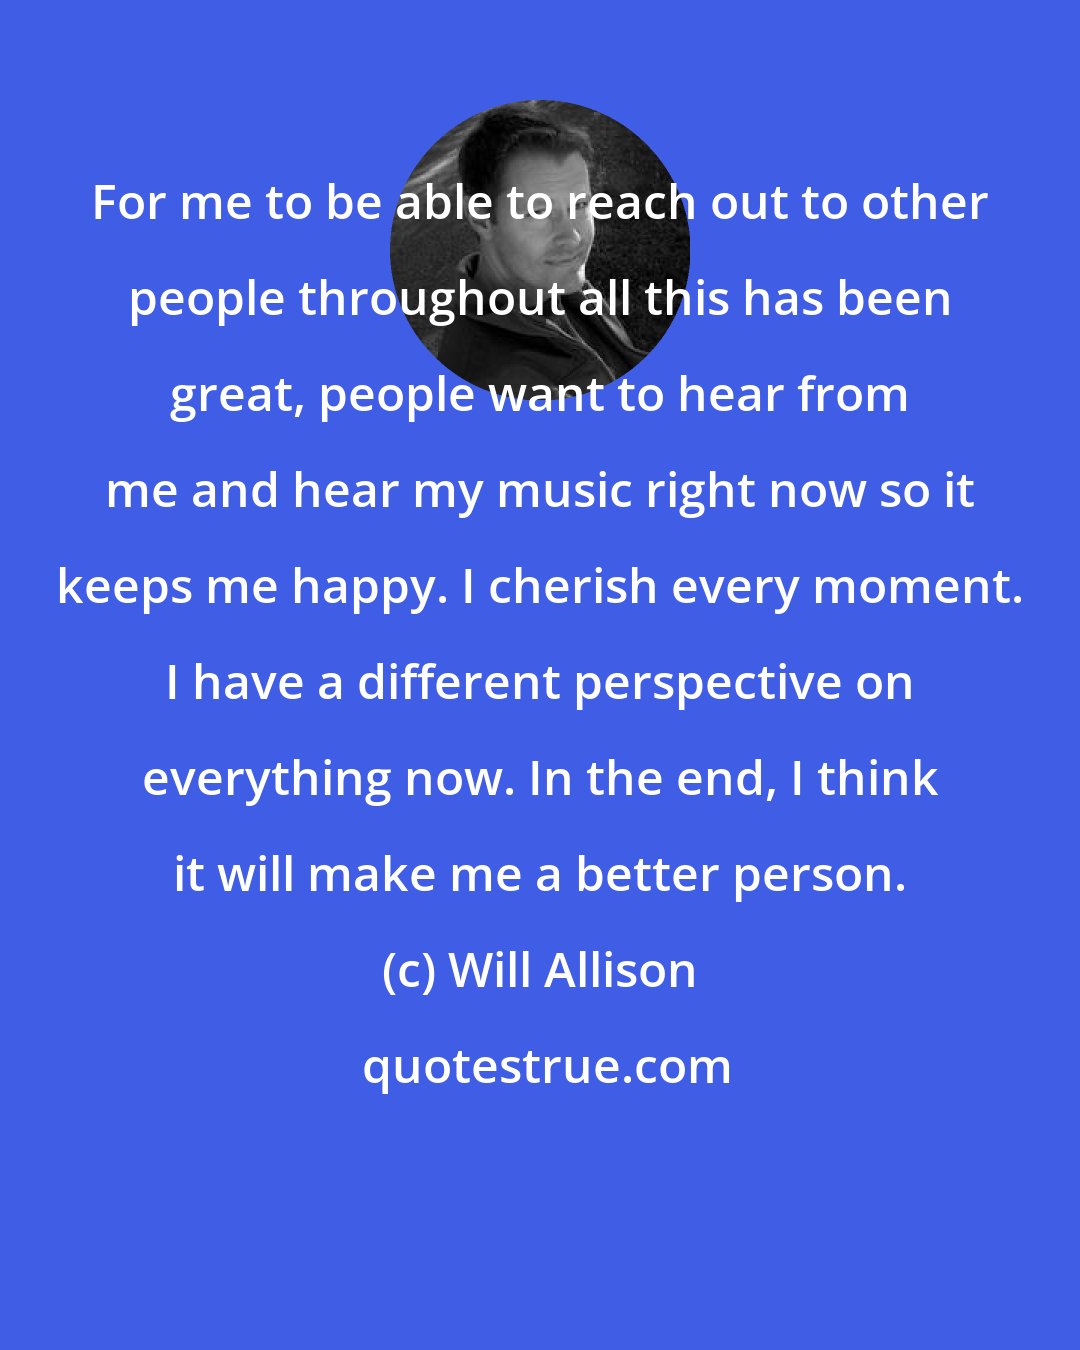 Will Allison: For me to be able to reach out to other people throughout all this has been great, people want to hear from me and hear my music right now so it keeps me happy. I cherish every moment. I have a different perspective on everything now. In the end, I think it will make me a better person.